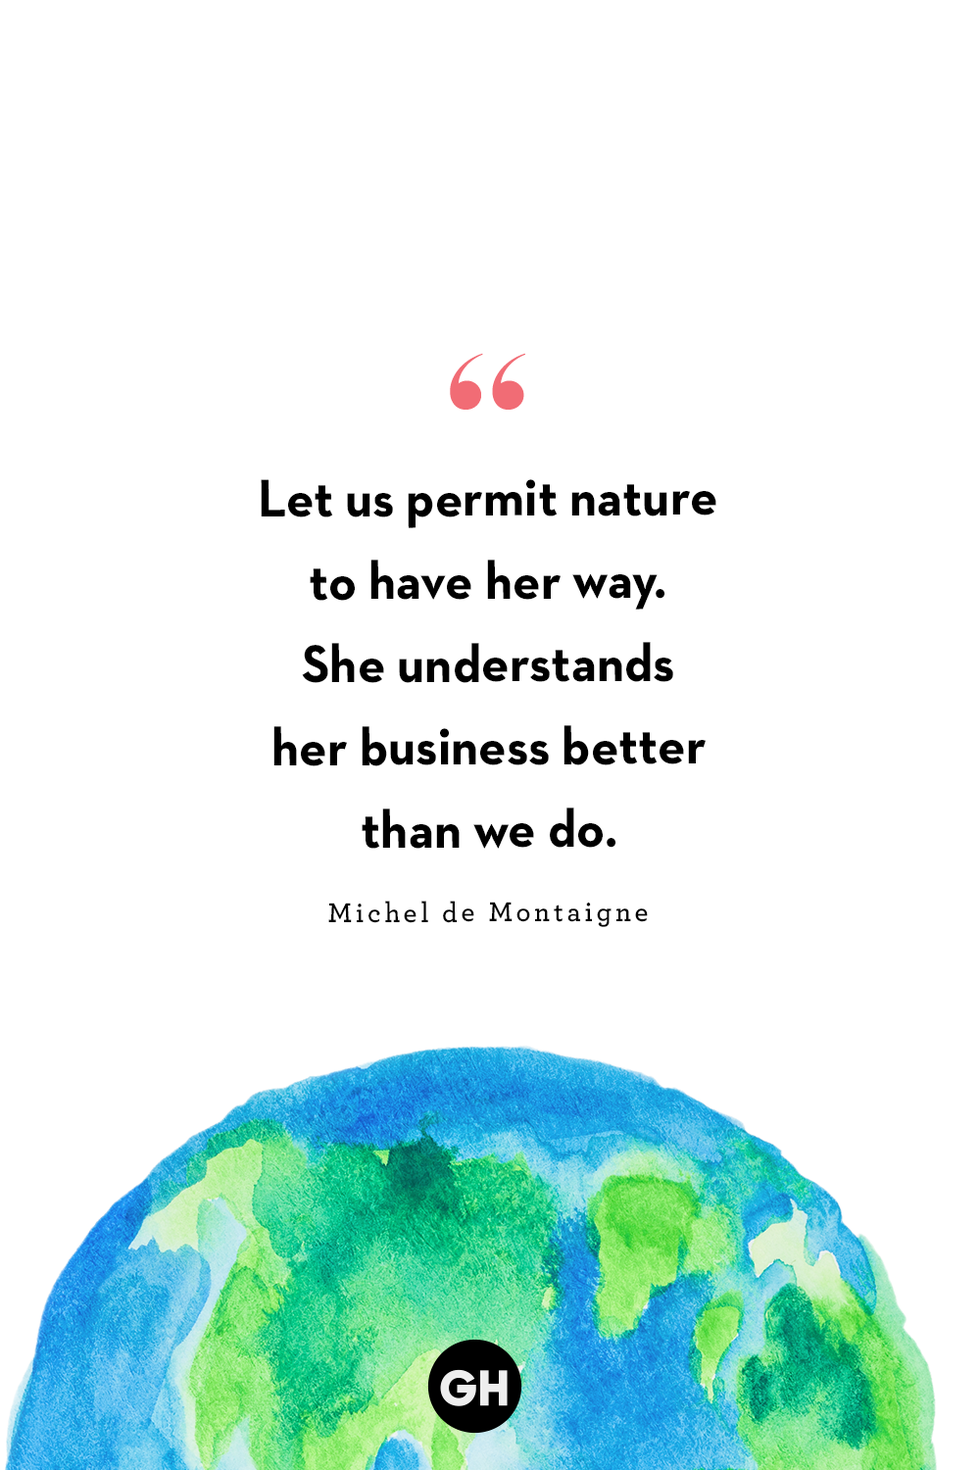 50 Best Earth Day Quotes 2023 - Slogans About Saving the Environment